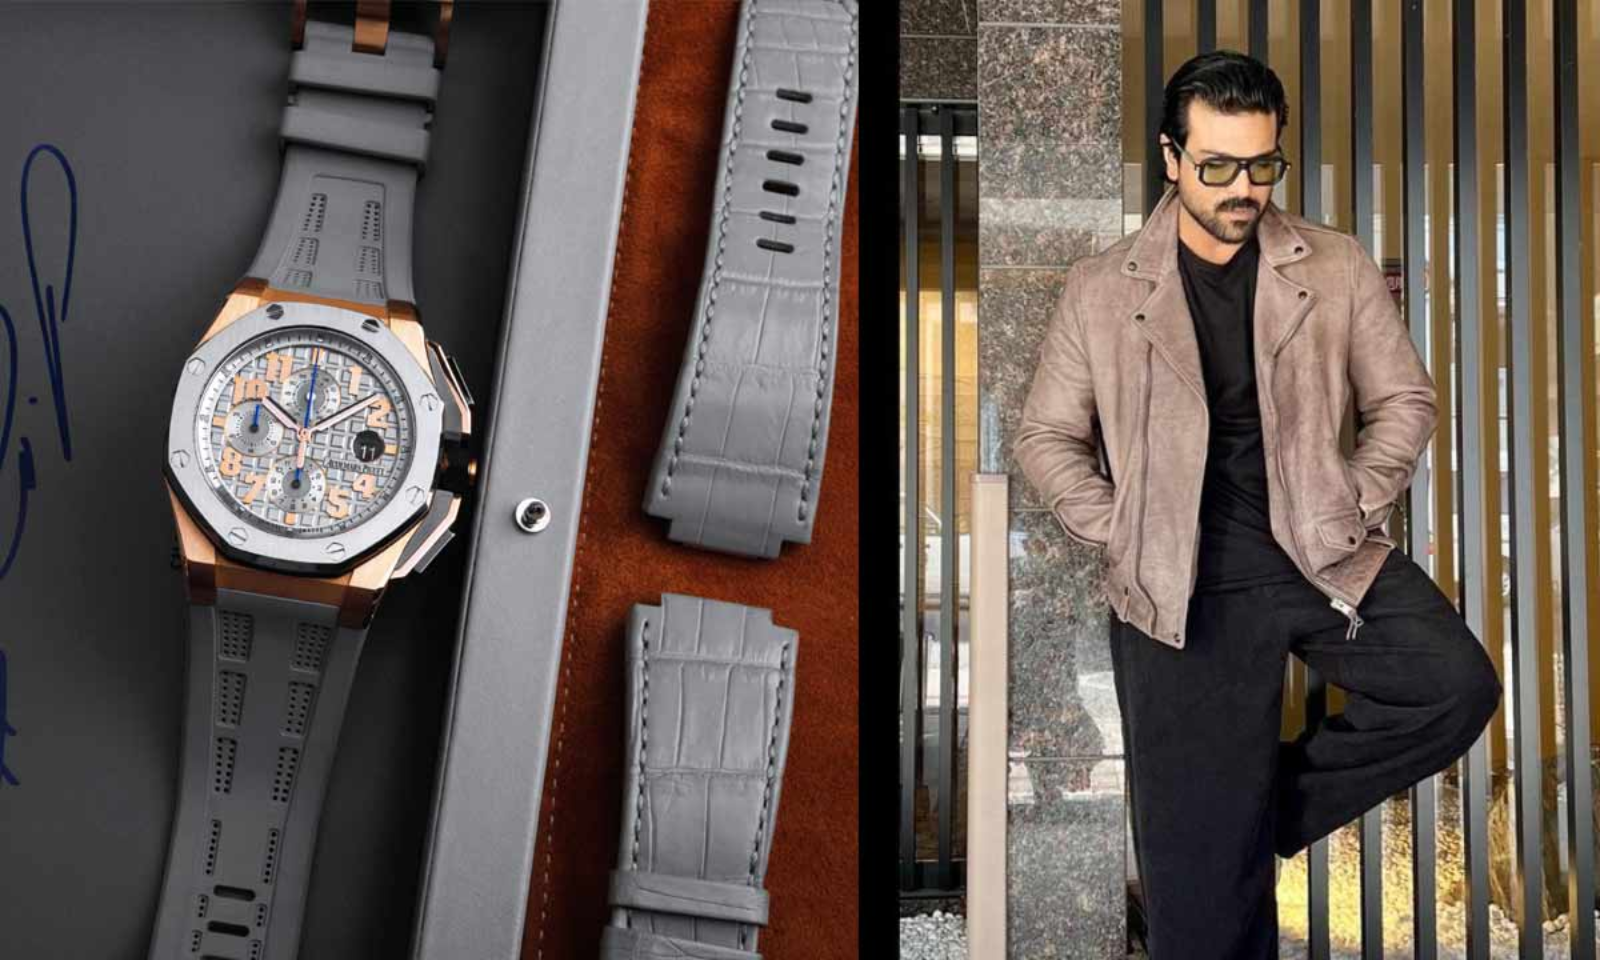 Actor Ram Charan spotted wearing Richard Mille